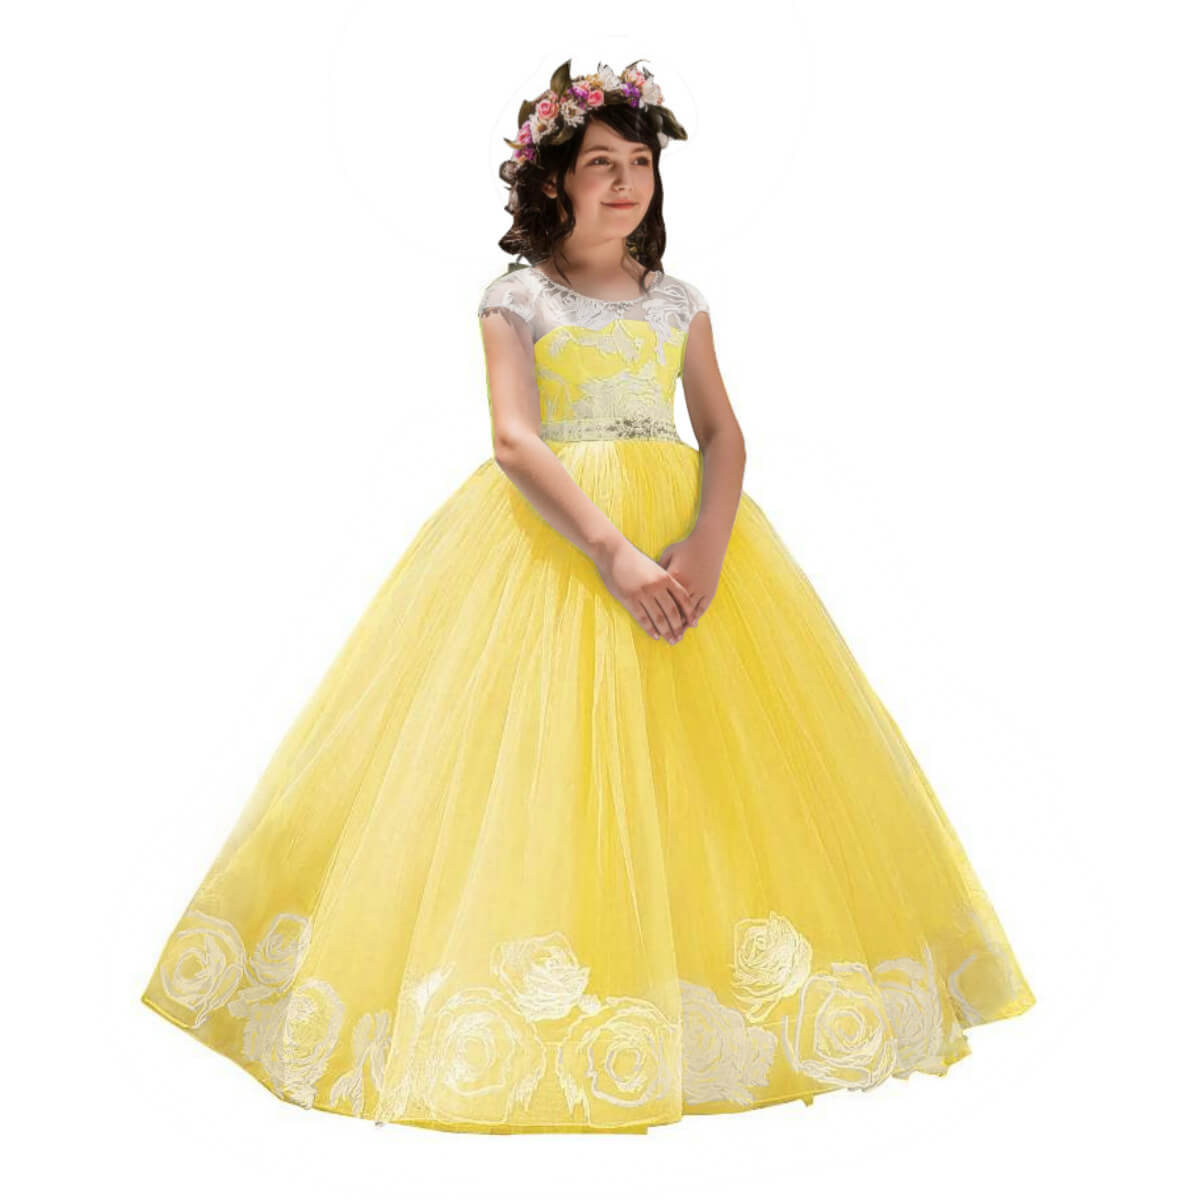 Floral Lace Backless Long Flower Girl Dresses Girls Bridesmaid Little Lady Dress